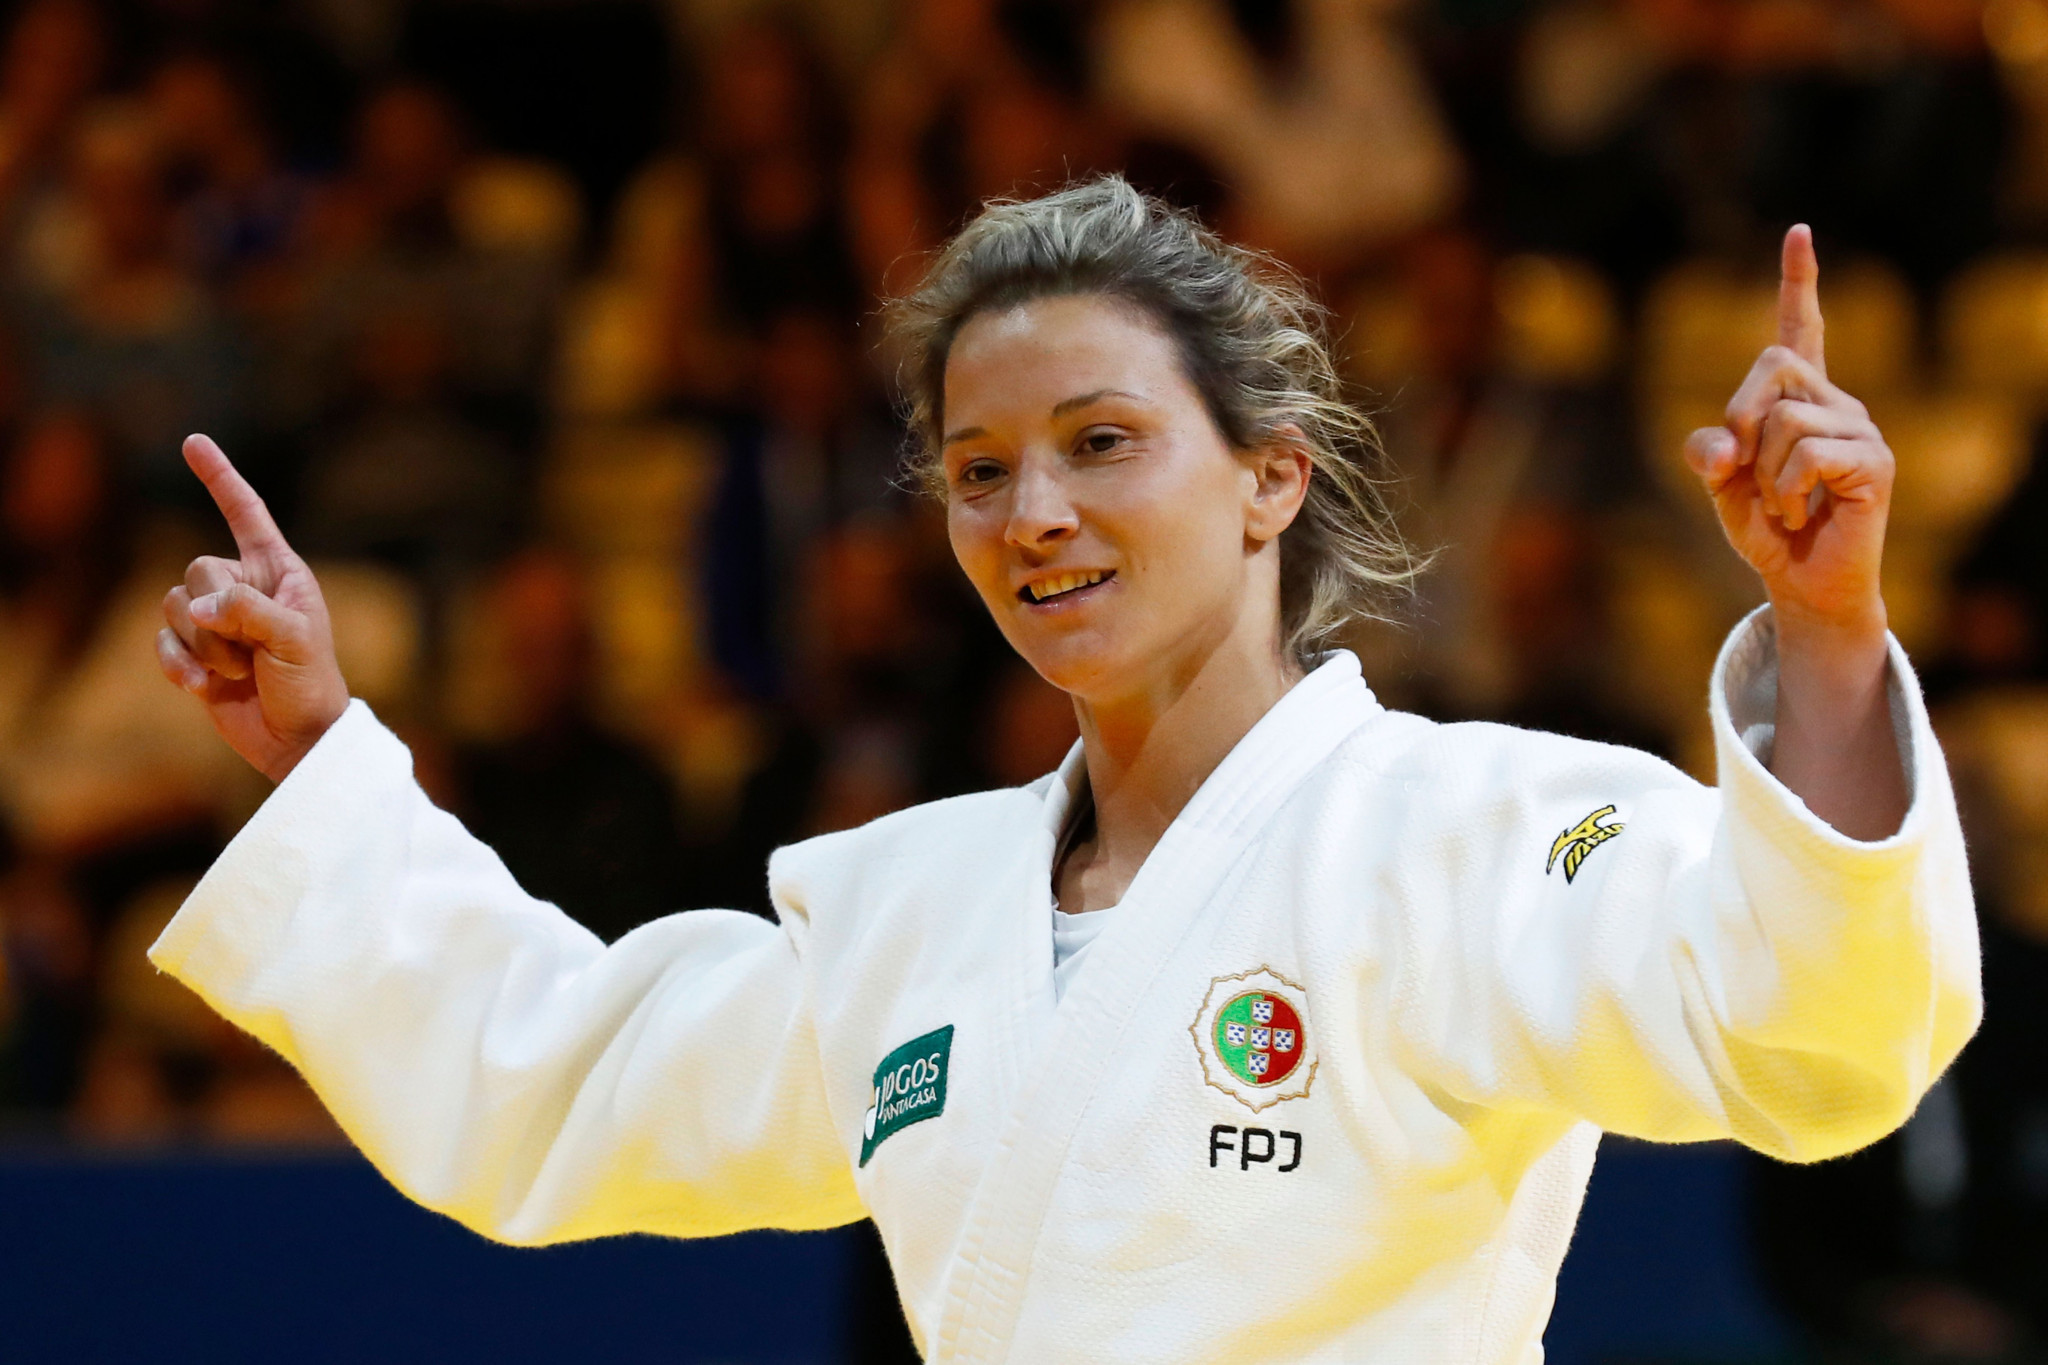 Telma Monteiro claimed gold in the women's under-57kg category ©Getty Images